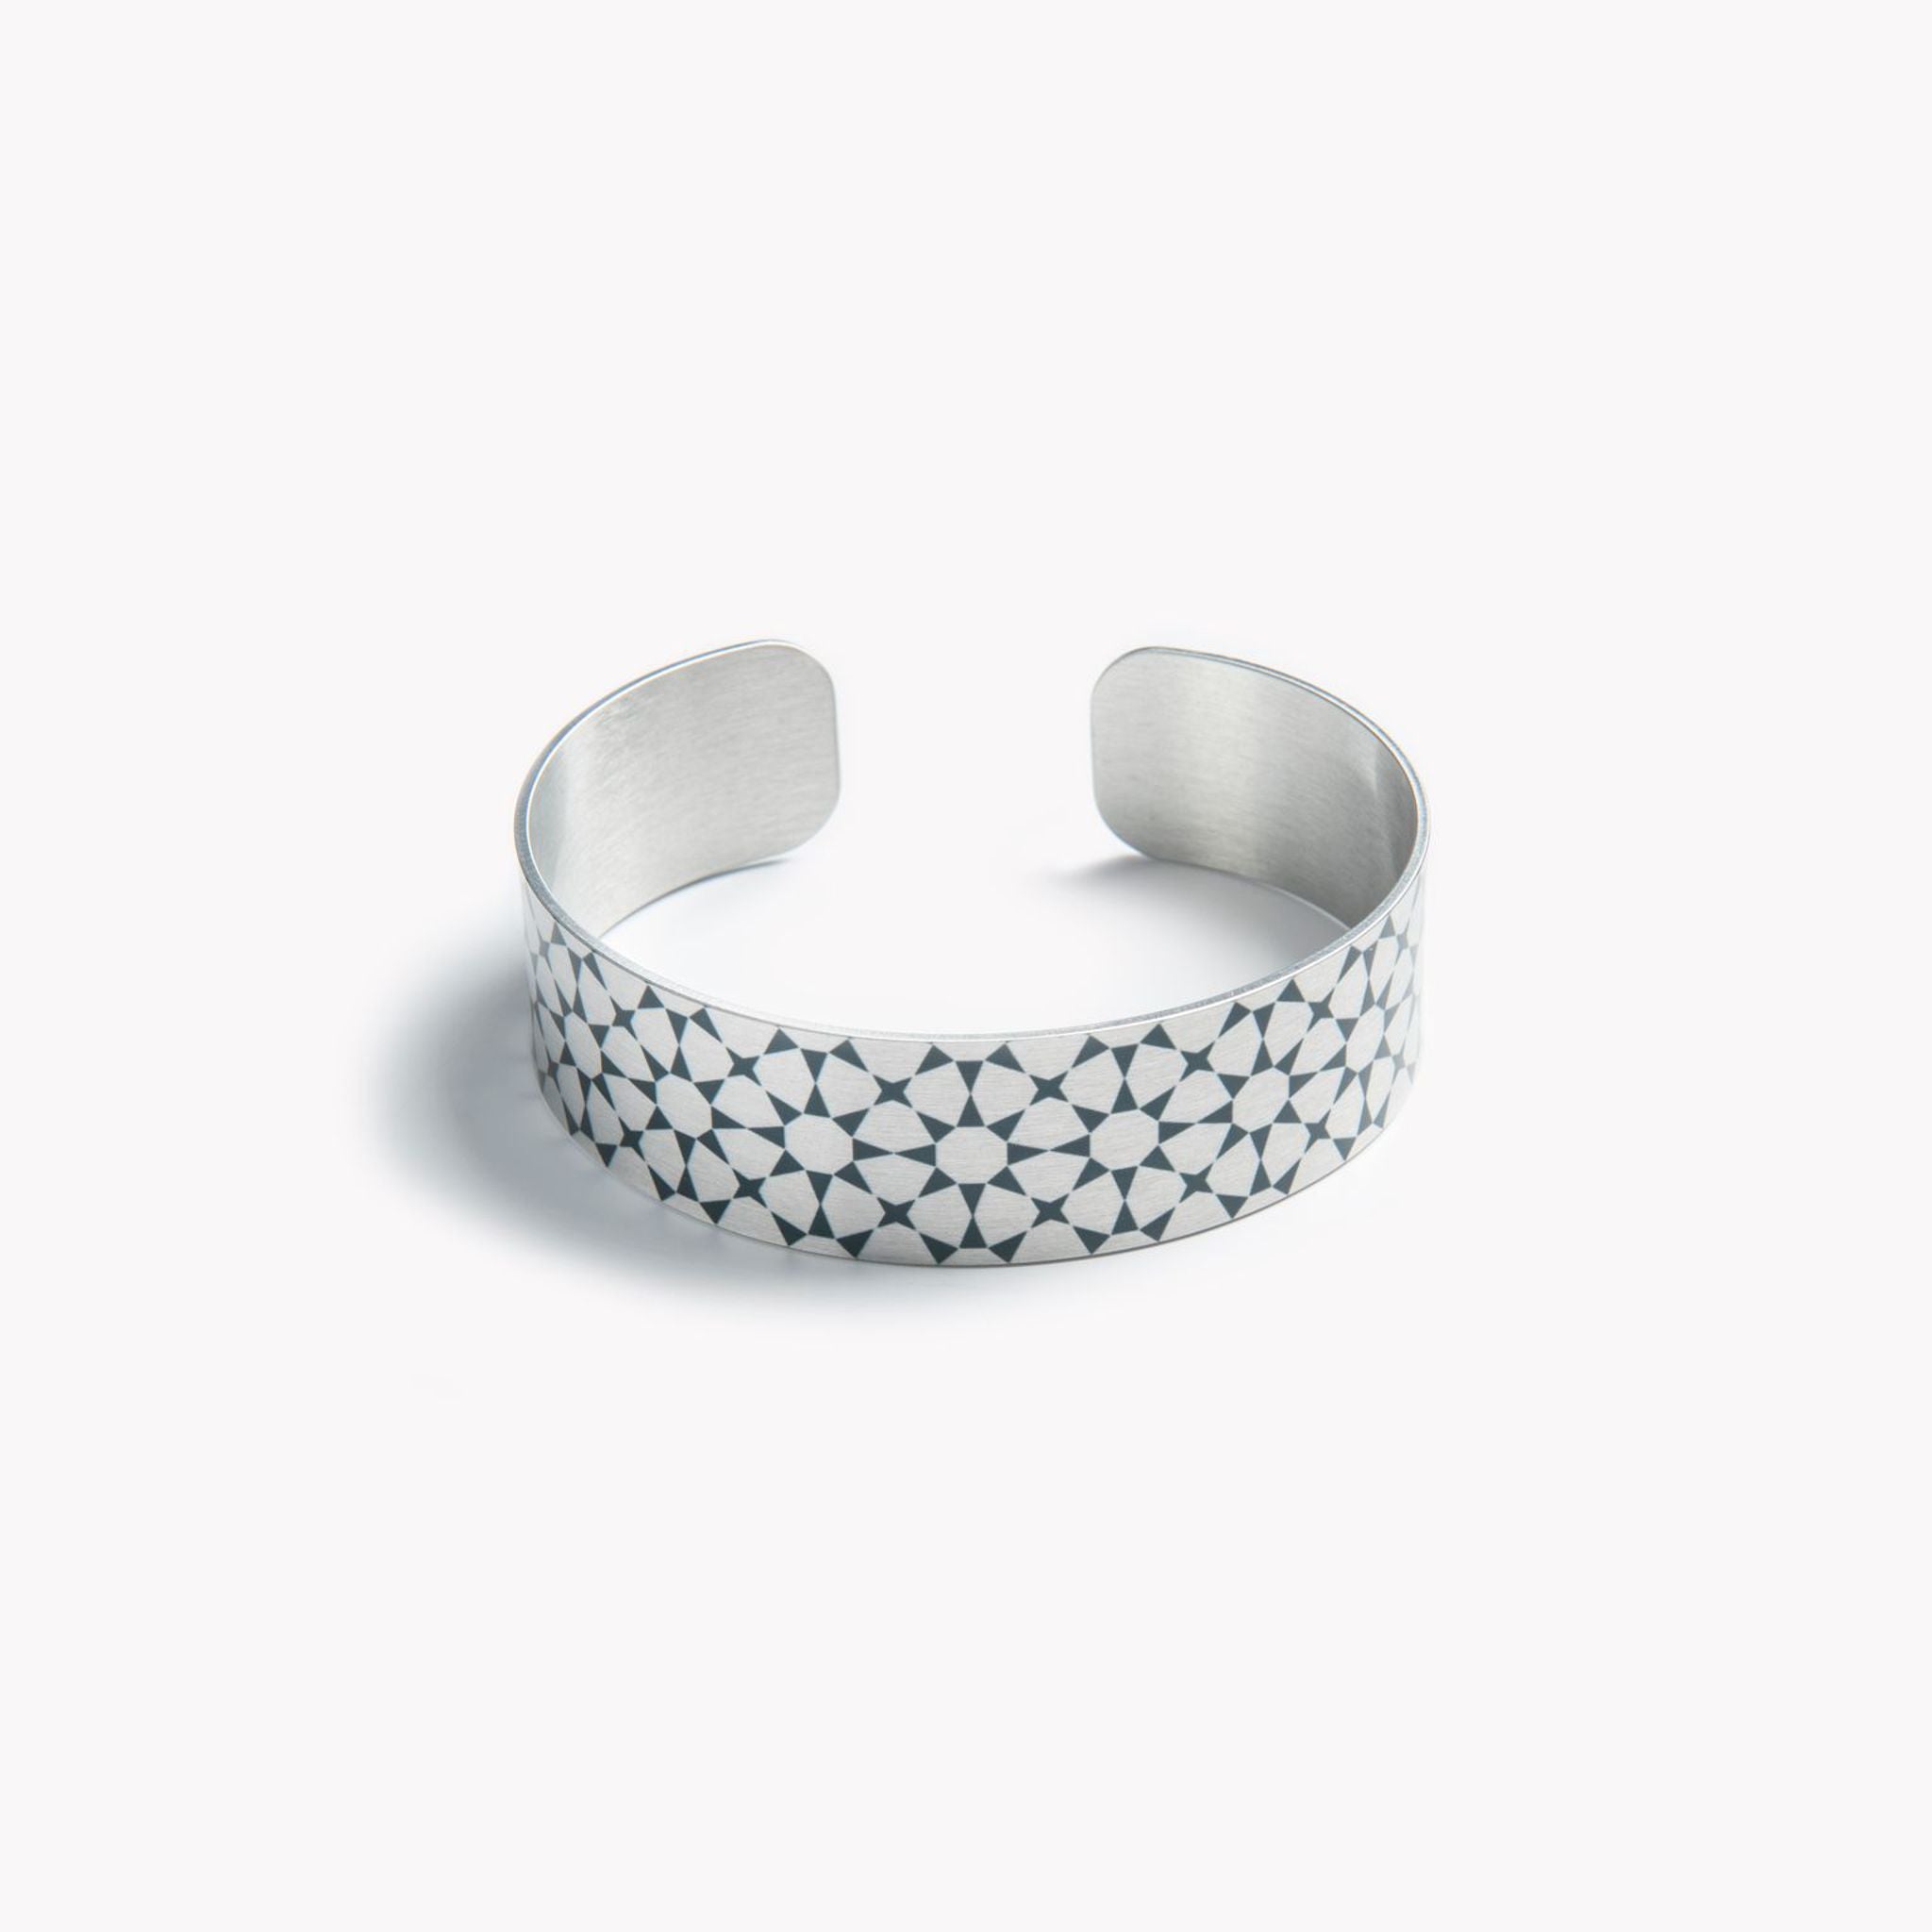 An intricately detailed aluminium cuff bracelet with a black star pattern.